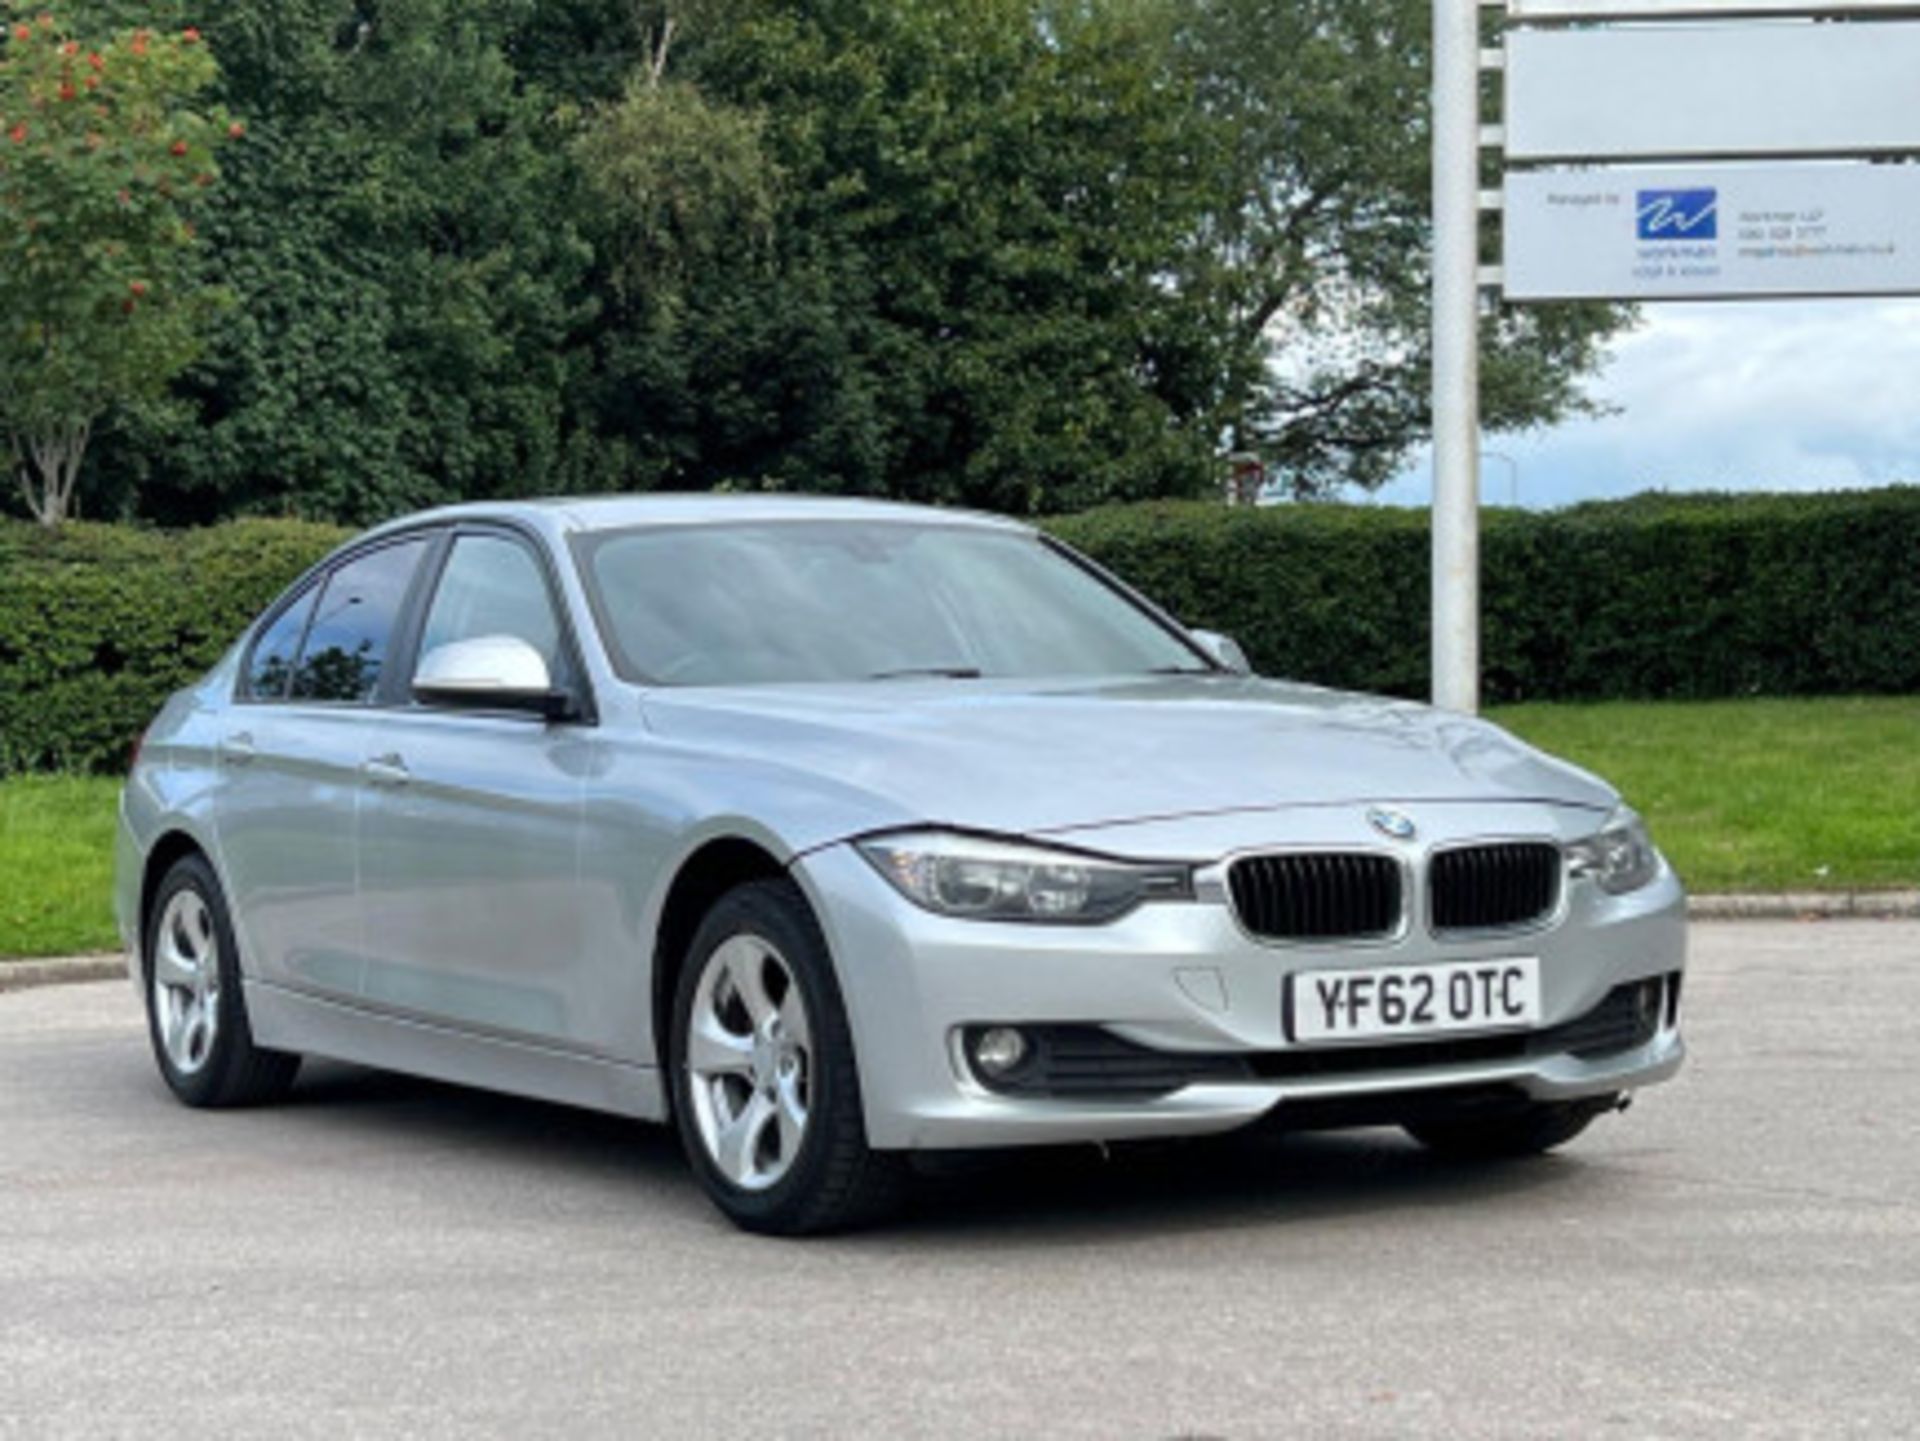 BMW 3 SERIES 2.0 DIESEL ED START STOP - A WELL-MAINTAINED GEM >>--NO VAT ON HAMMER--<< - Image 135 of 229